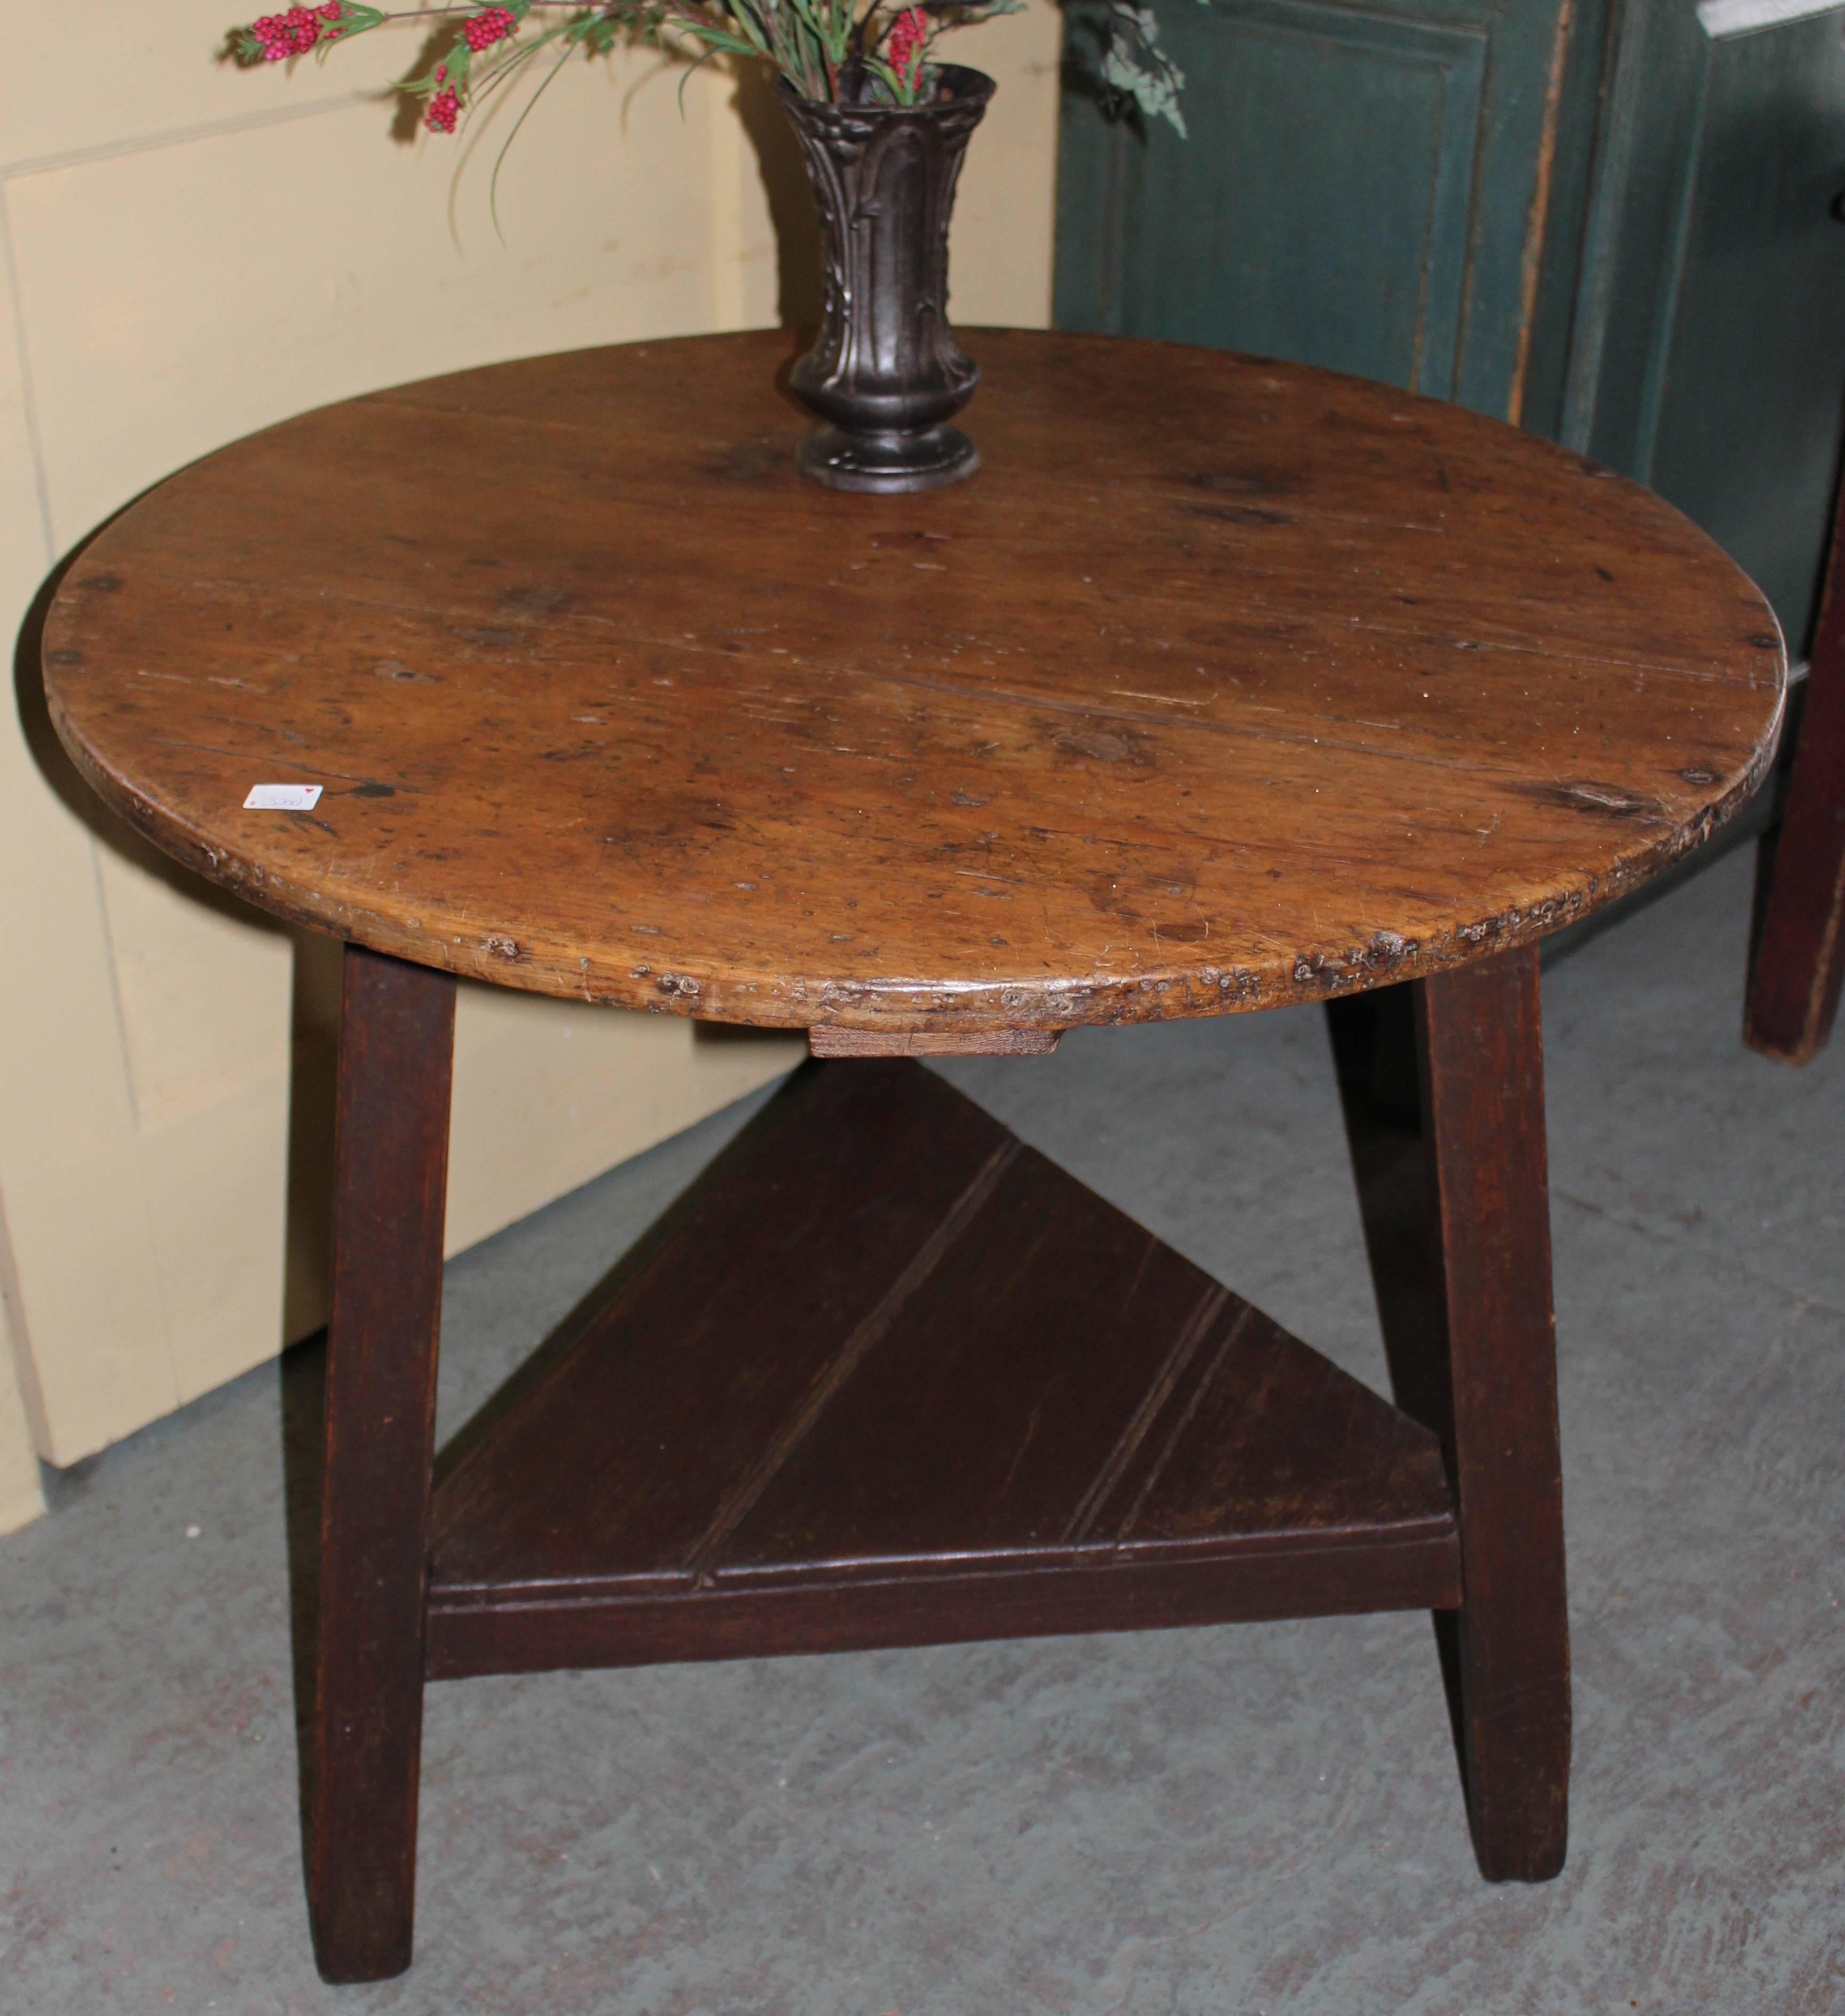 Round pedestal table, cricket table.